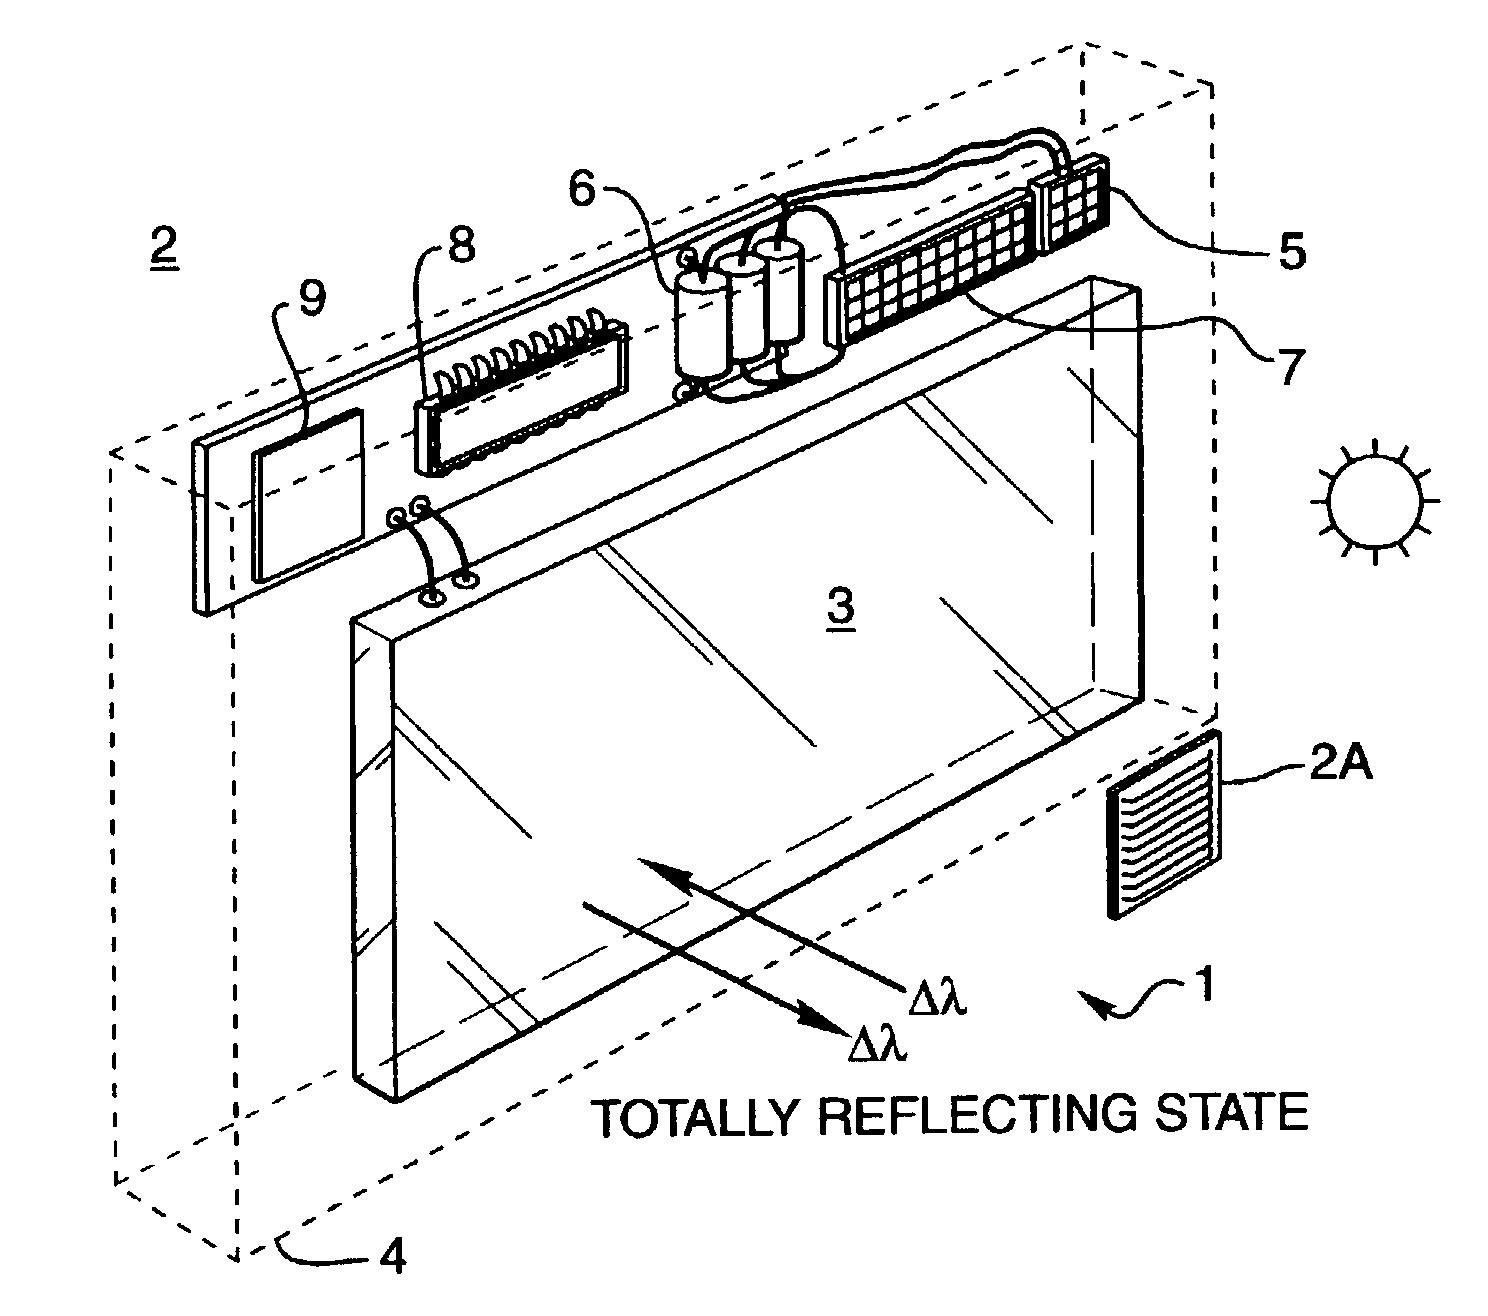 Electro-optical glazing structures having reflection and transparent modes of operation